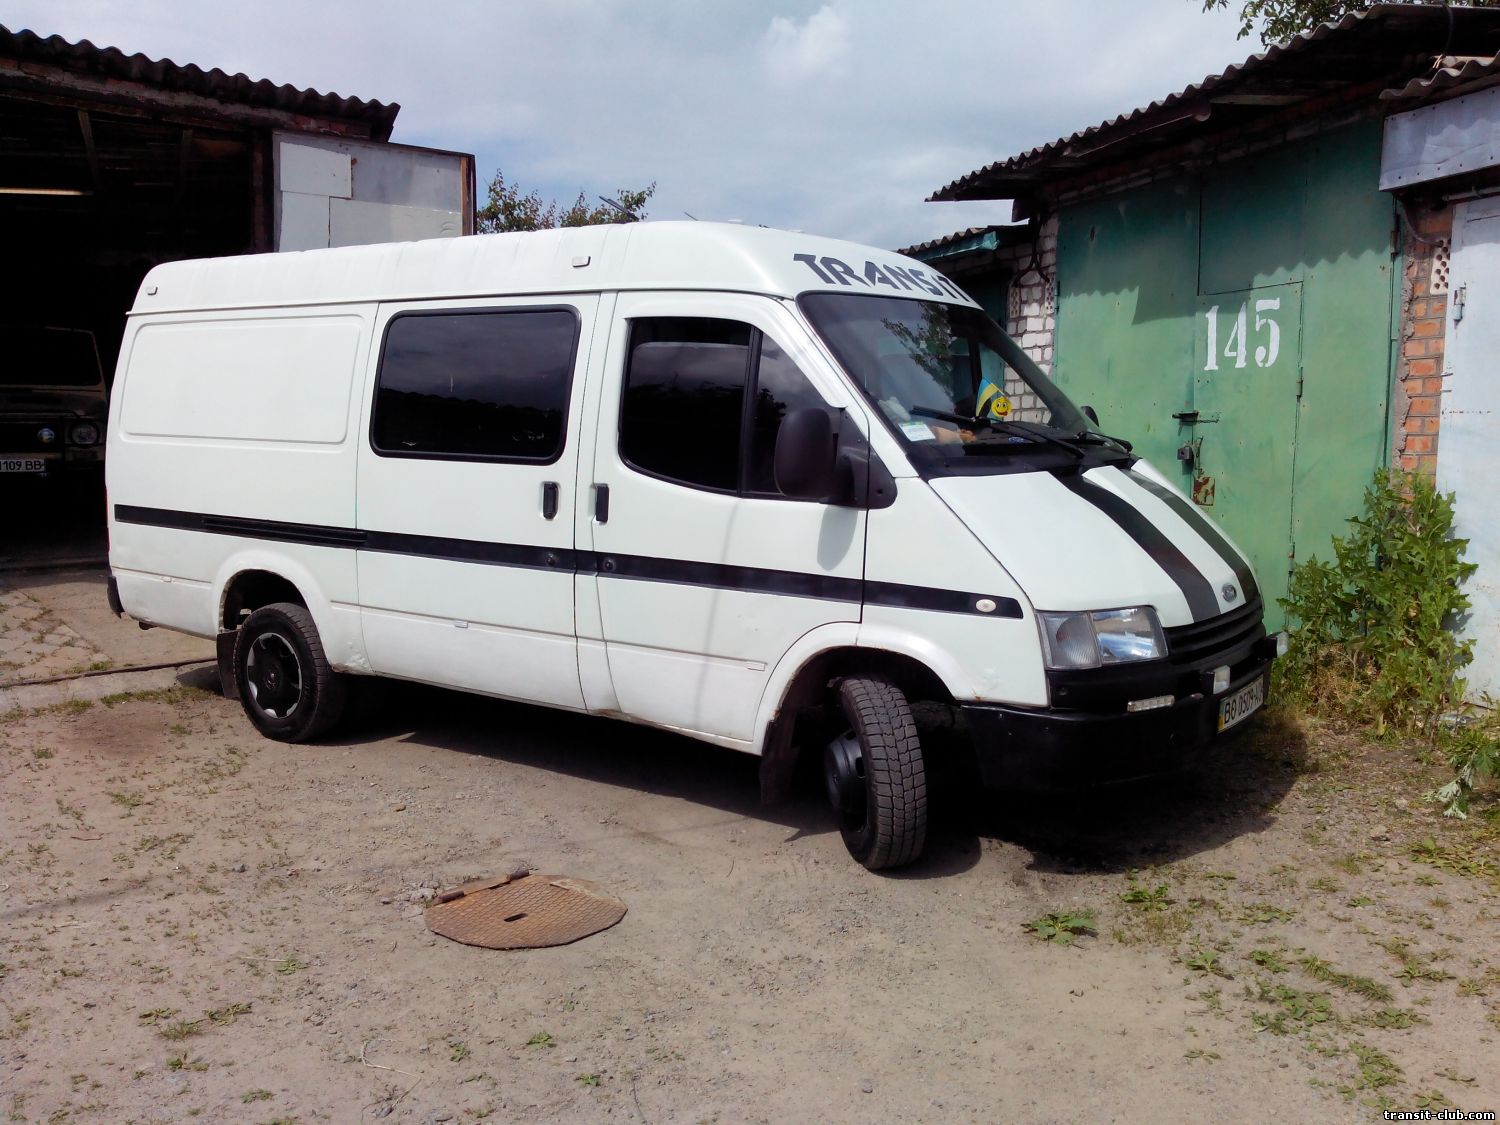 Форд транзит 1990. Ford Transit 2. Ford Transit 2.5 дизель. Форд Транзит 1995 2.5 дизель. Форд Транзит 1999 2.5 дизель.